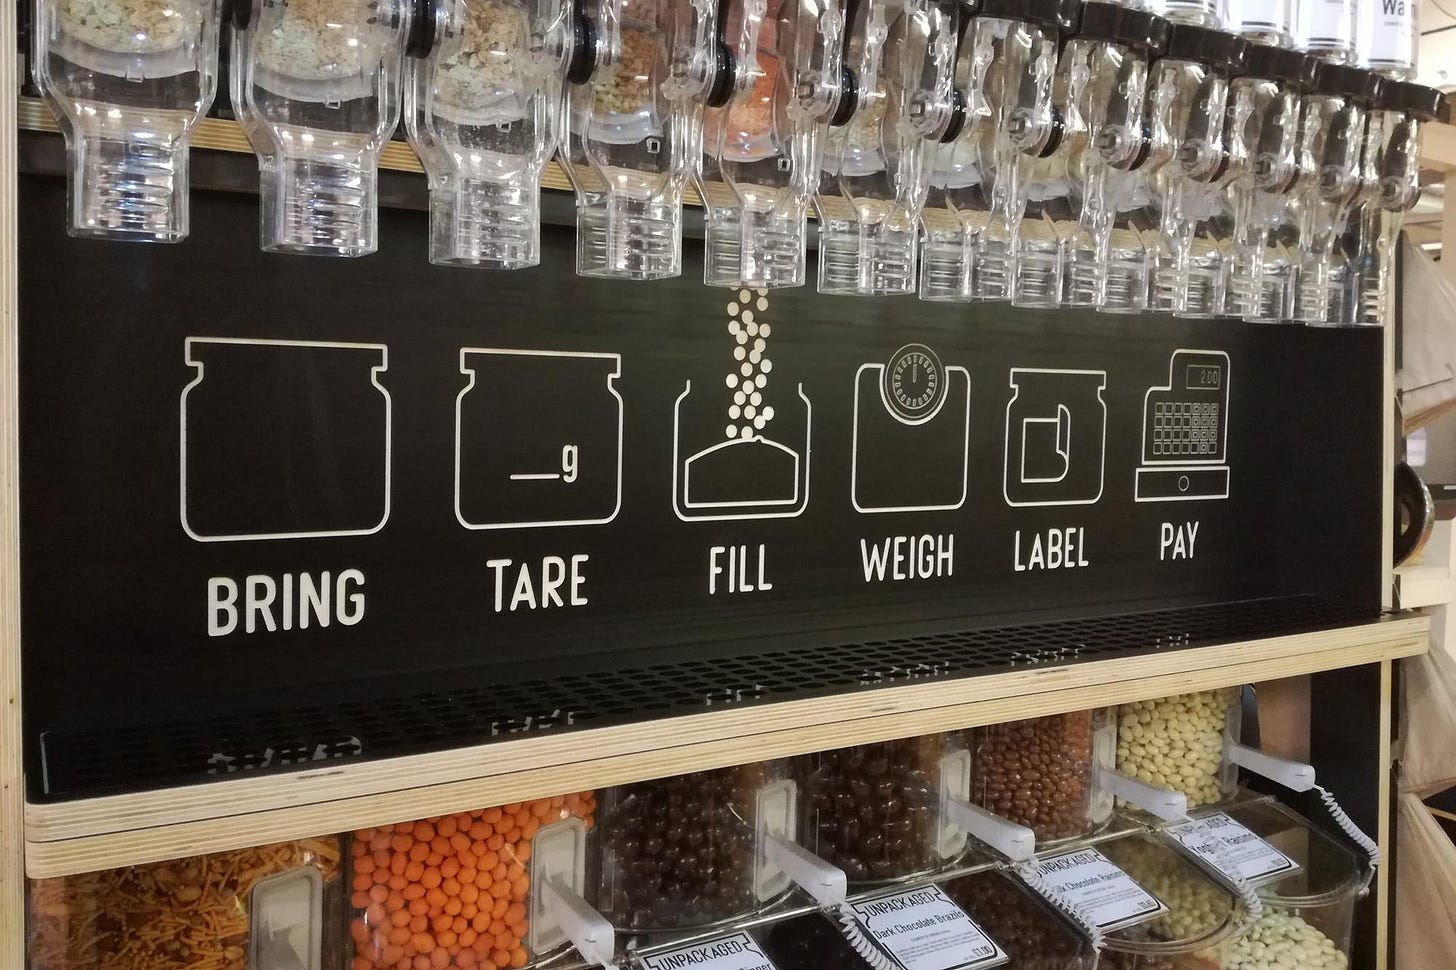 Close up photo inside the aisle of a supermarket. The photo focuses on the "refill aisle" with products such as grains and chocolate coated nuts sold in bulk. The photo shows a promotion inside the store, that highlights how the process works: Bring a jar, tare it, fill it, weigh it, label it, and pay.